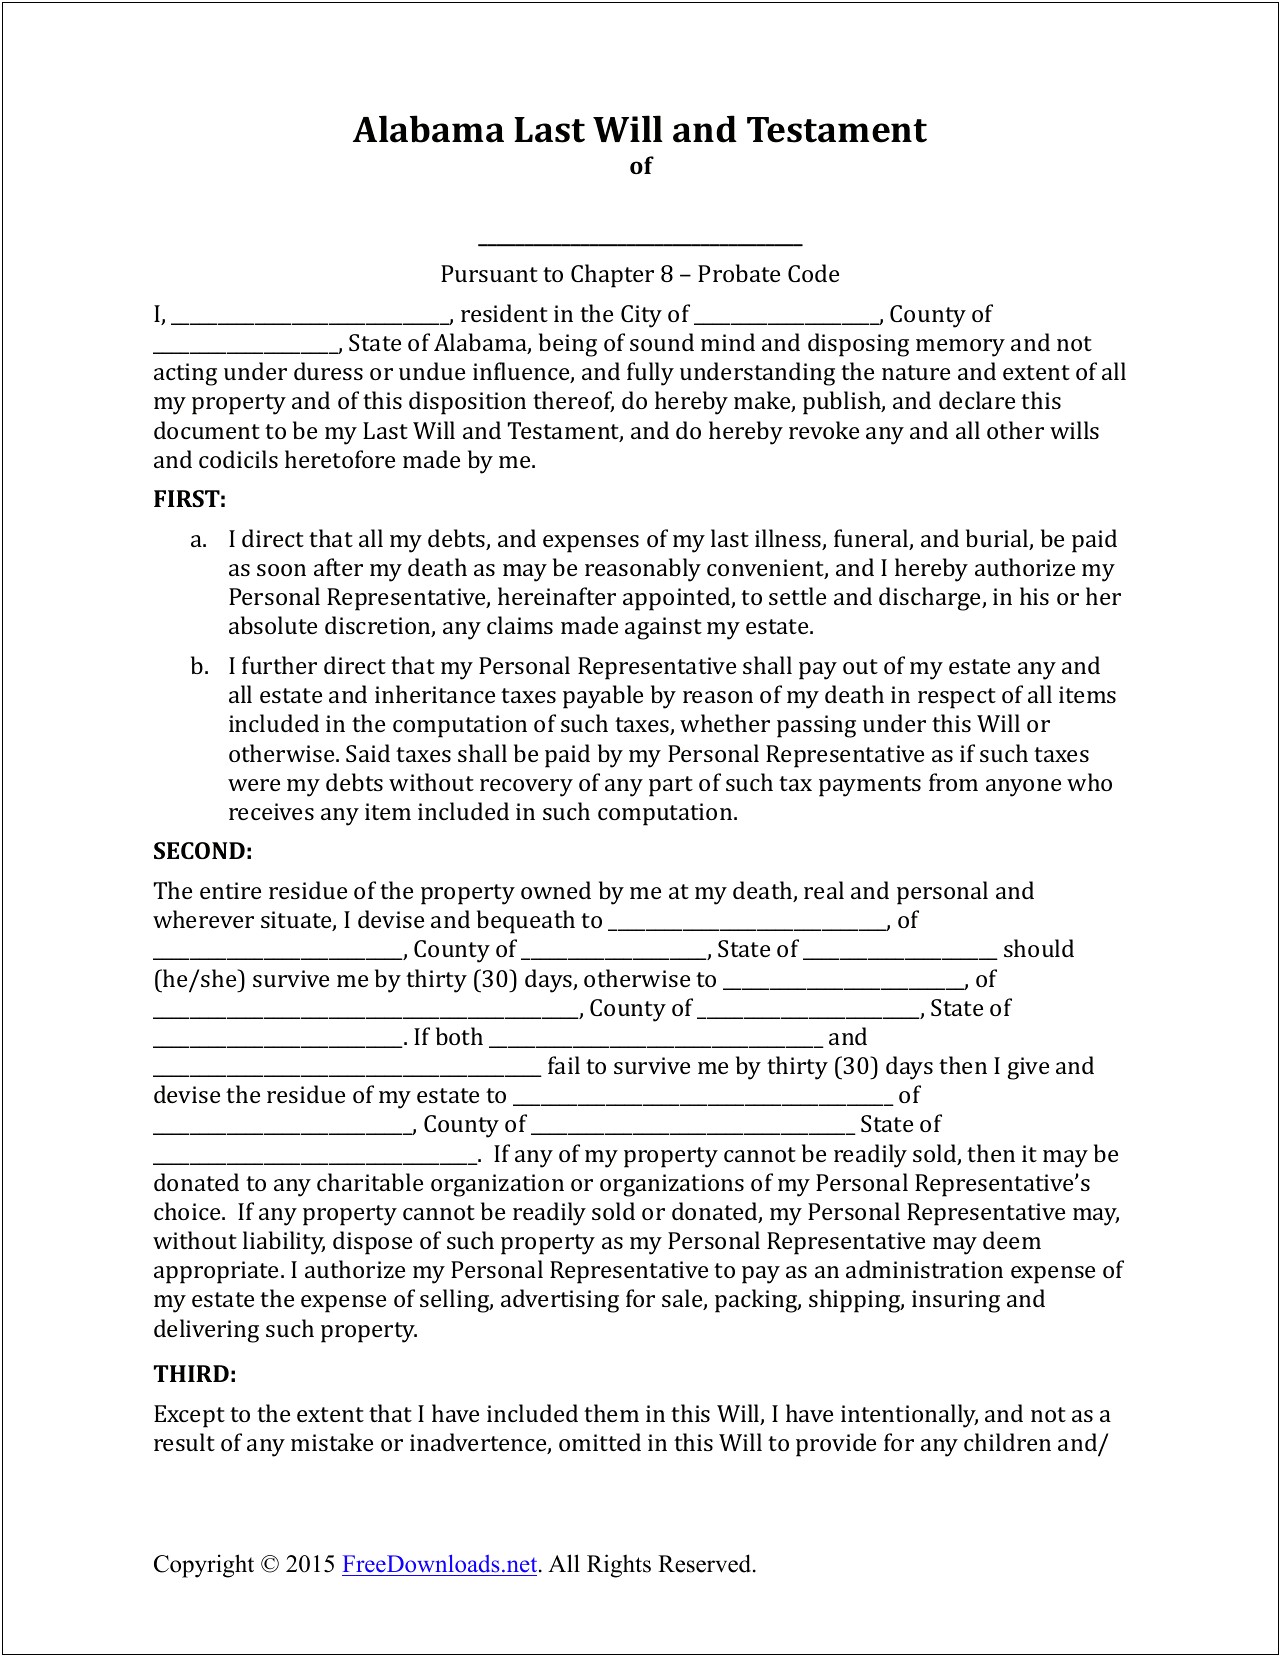 Last Will And Testament Template Microsoft Word